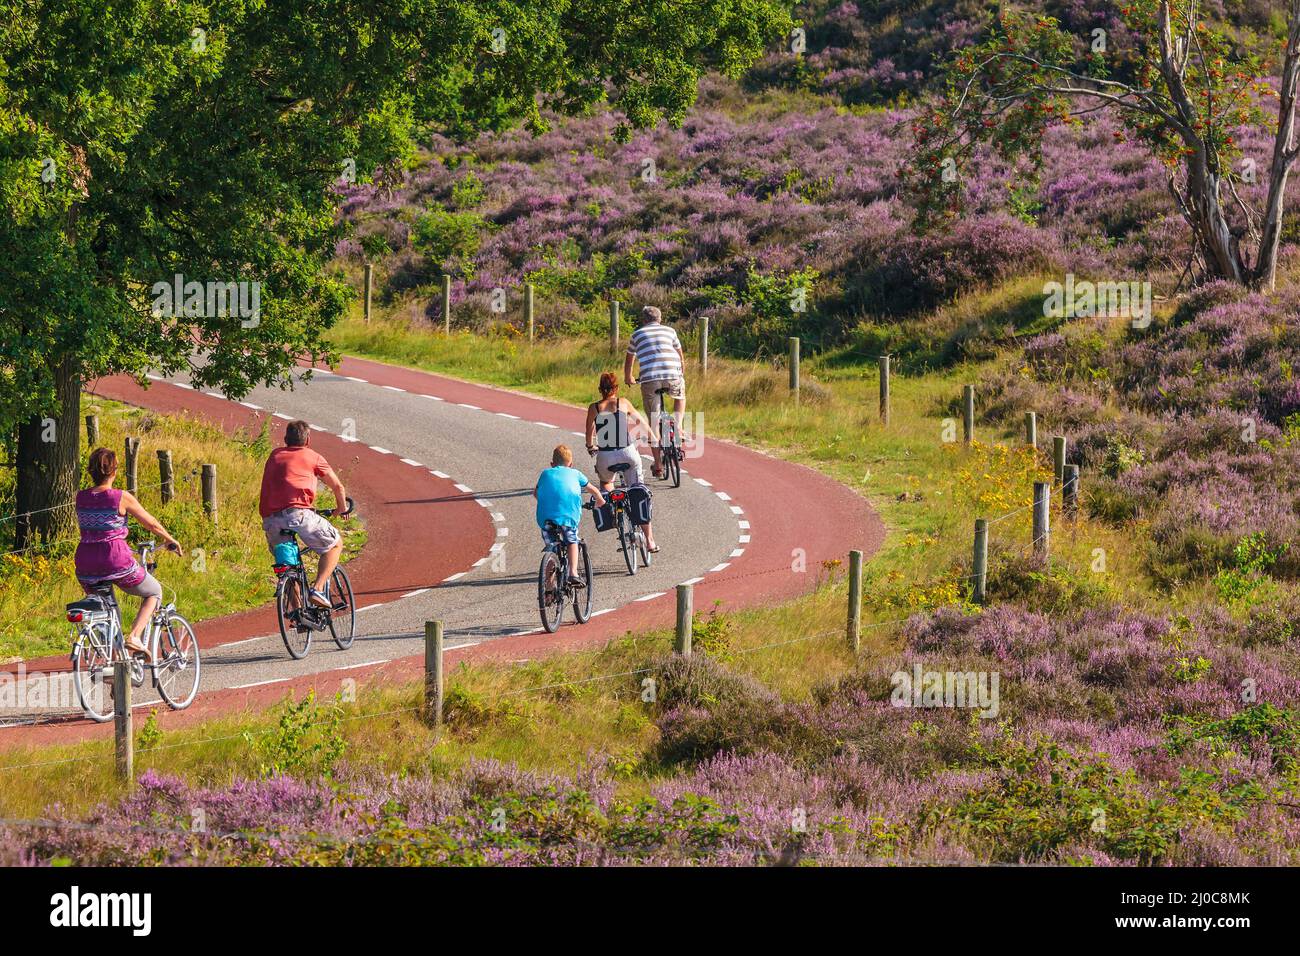 RHEDEN, THE NETHERLANDS - AUGUST 13, 2015: Cycling tourists in Dutch national park Veluwezoom with blooming purple heath in Rheden, The Netherlands Stock Photo